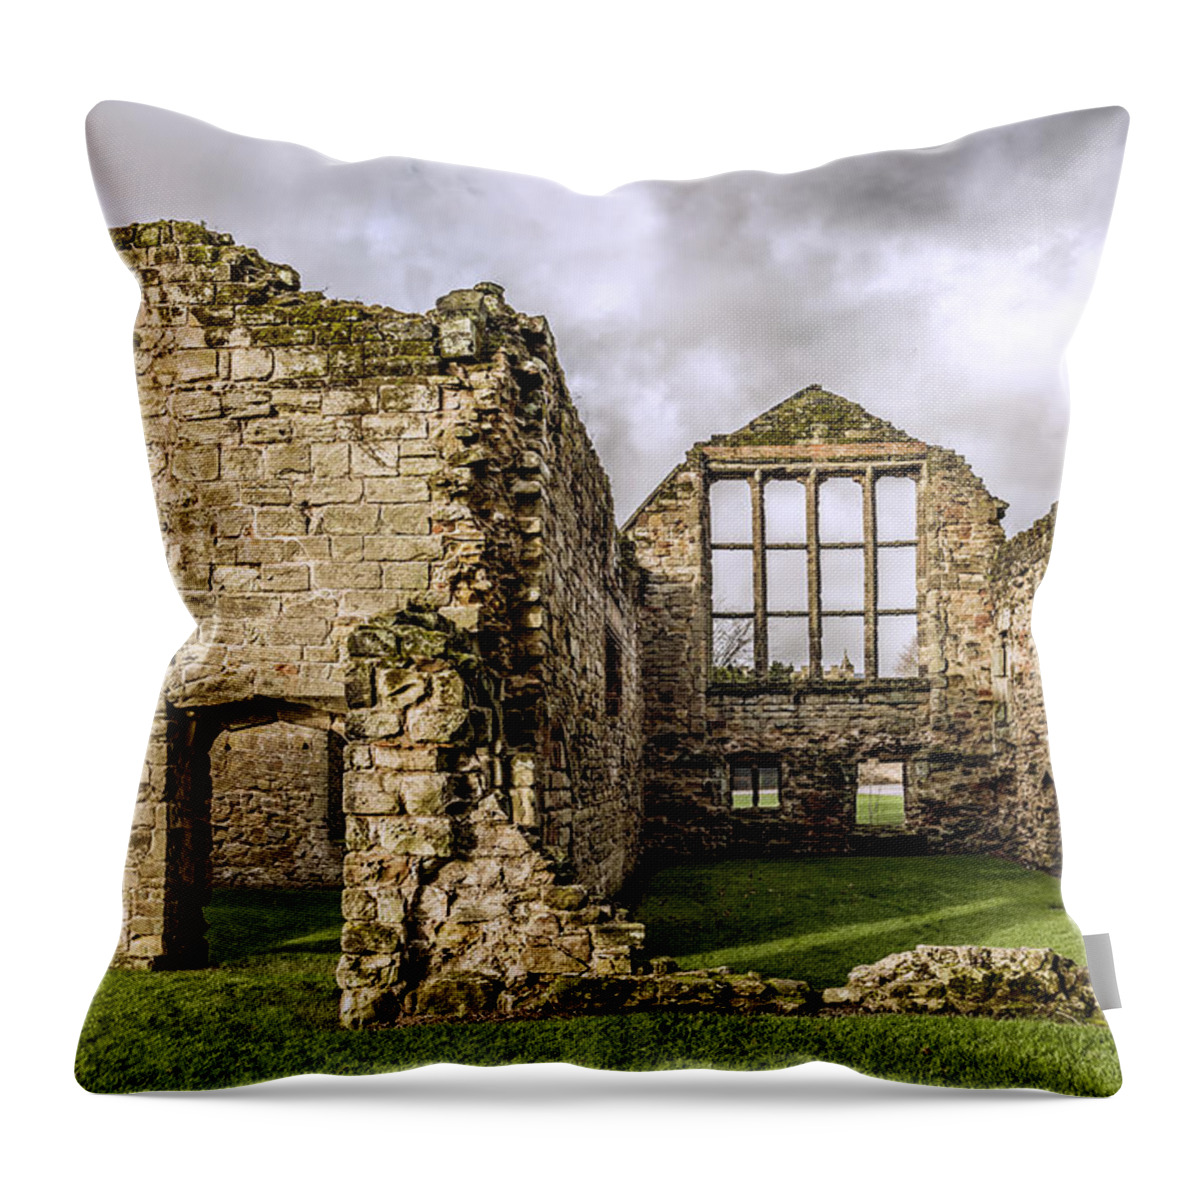 Castle Throw Pillow featuring the photograph Medieval Ruins by Nick Bywater